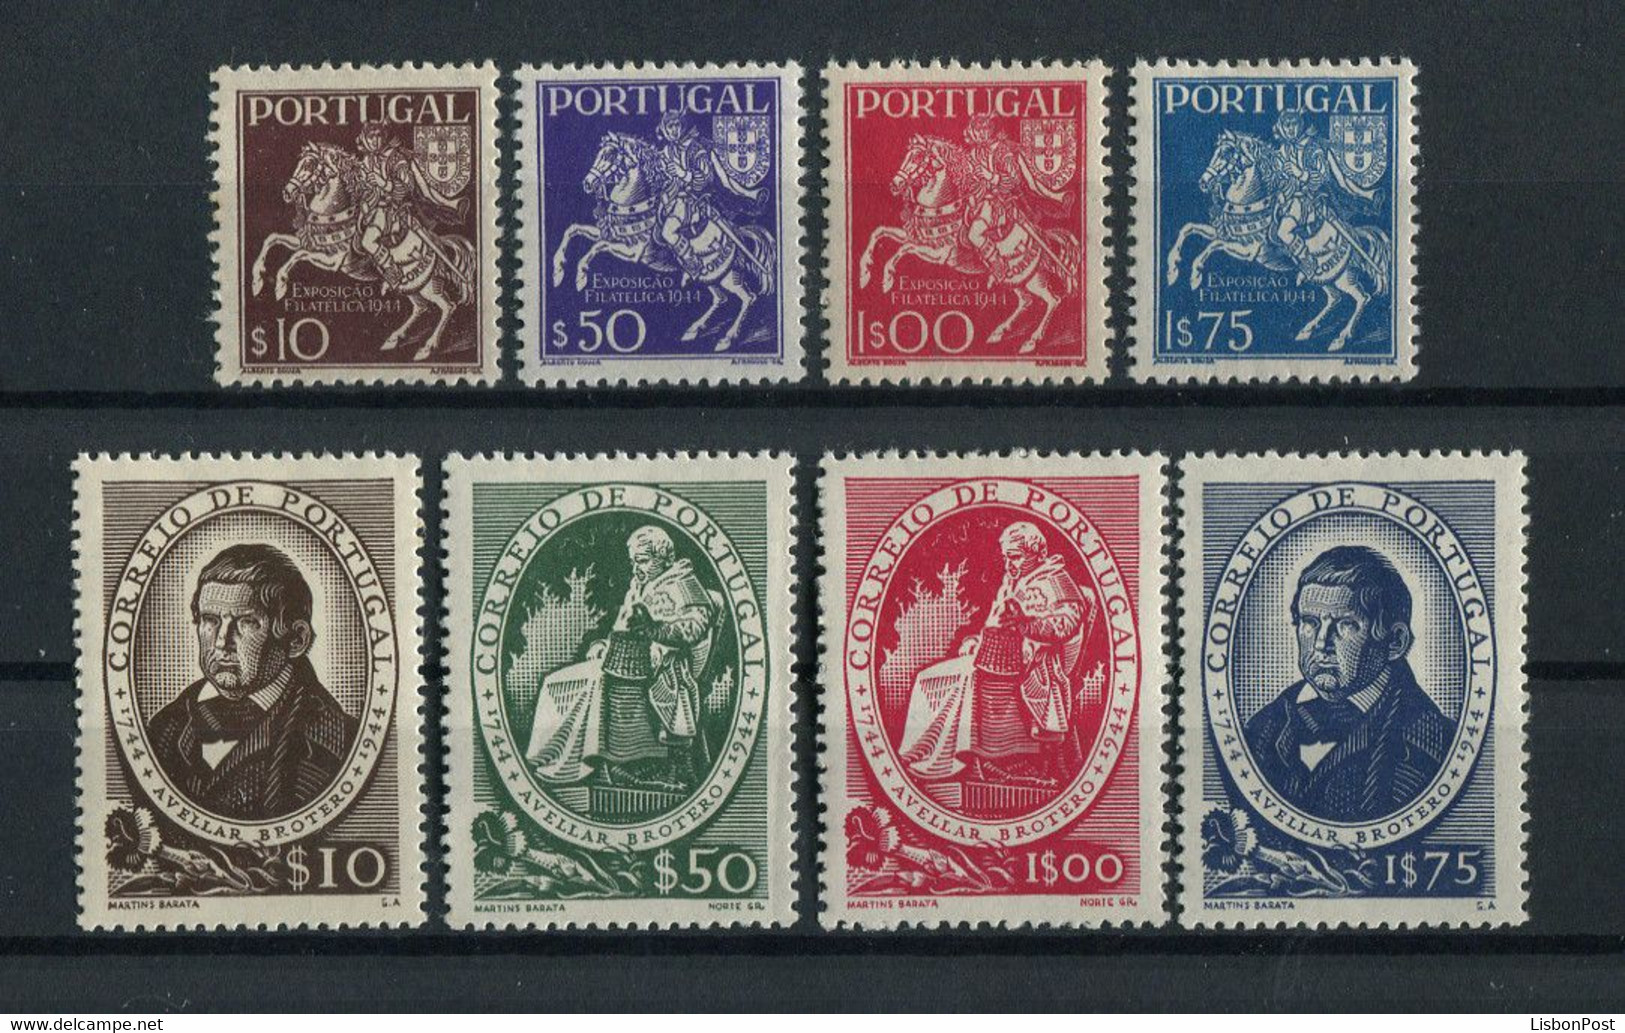 1944 Portugal Complete Year MNH Stamps. Année Compléte Timbres Neuf Sans Charnière. Ano Completo Novo Sem Charneira. - Volledig Jaar